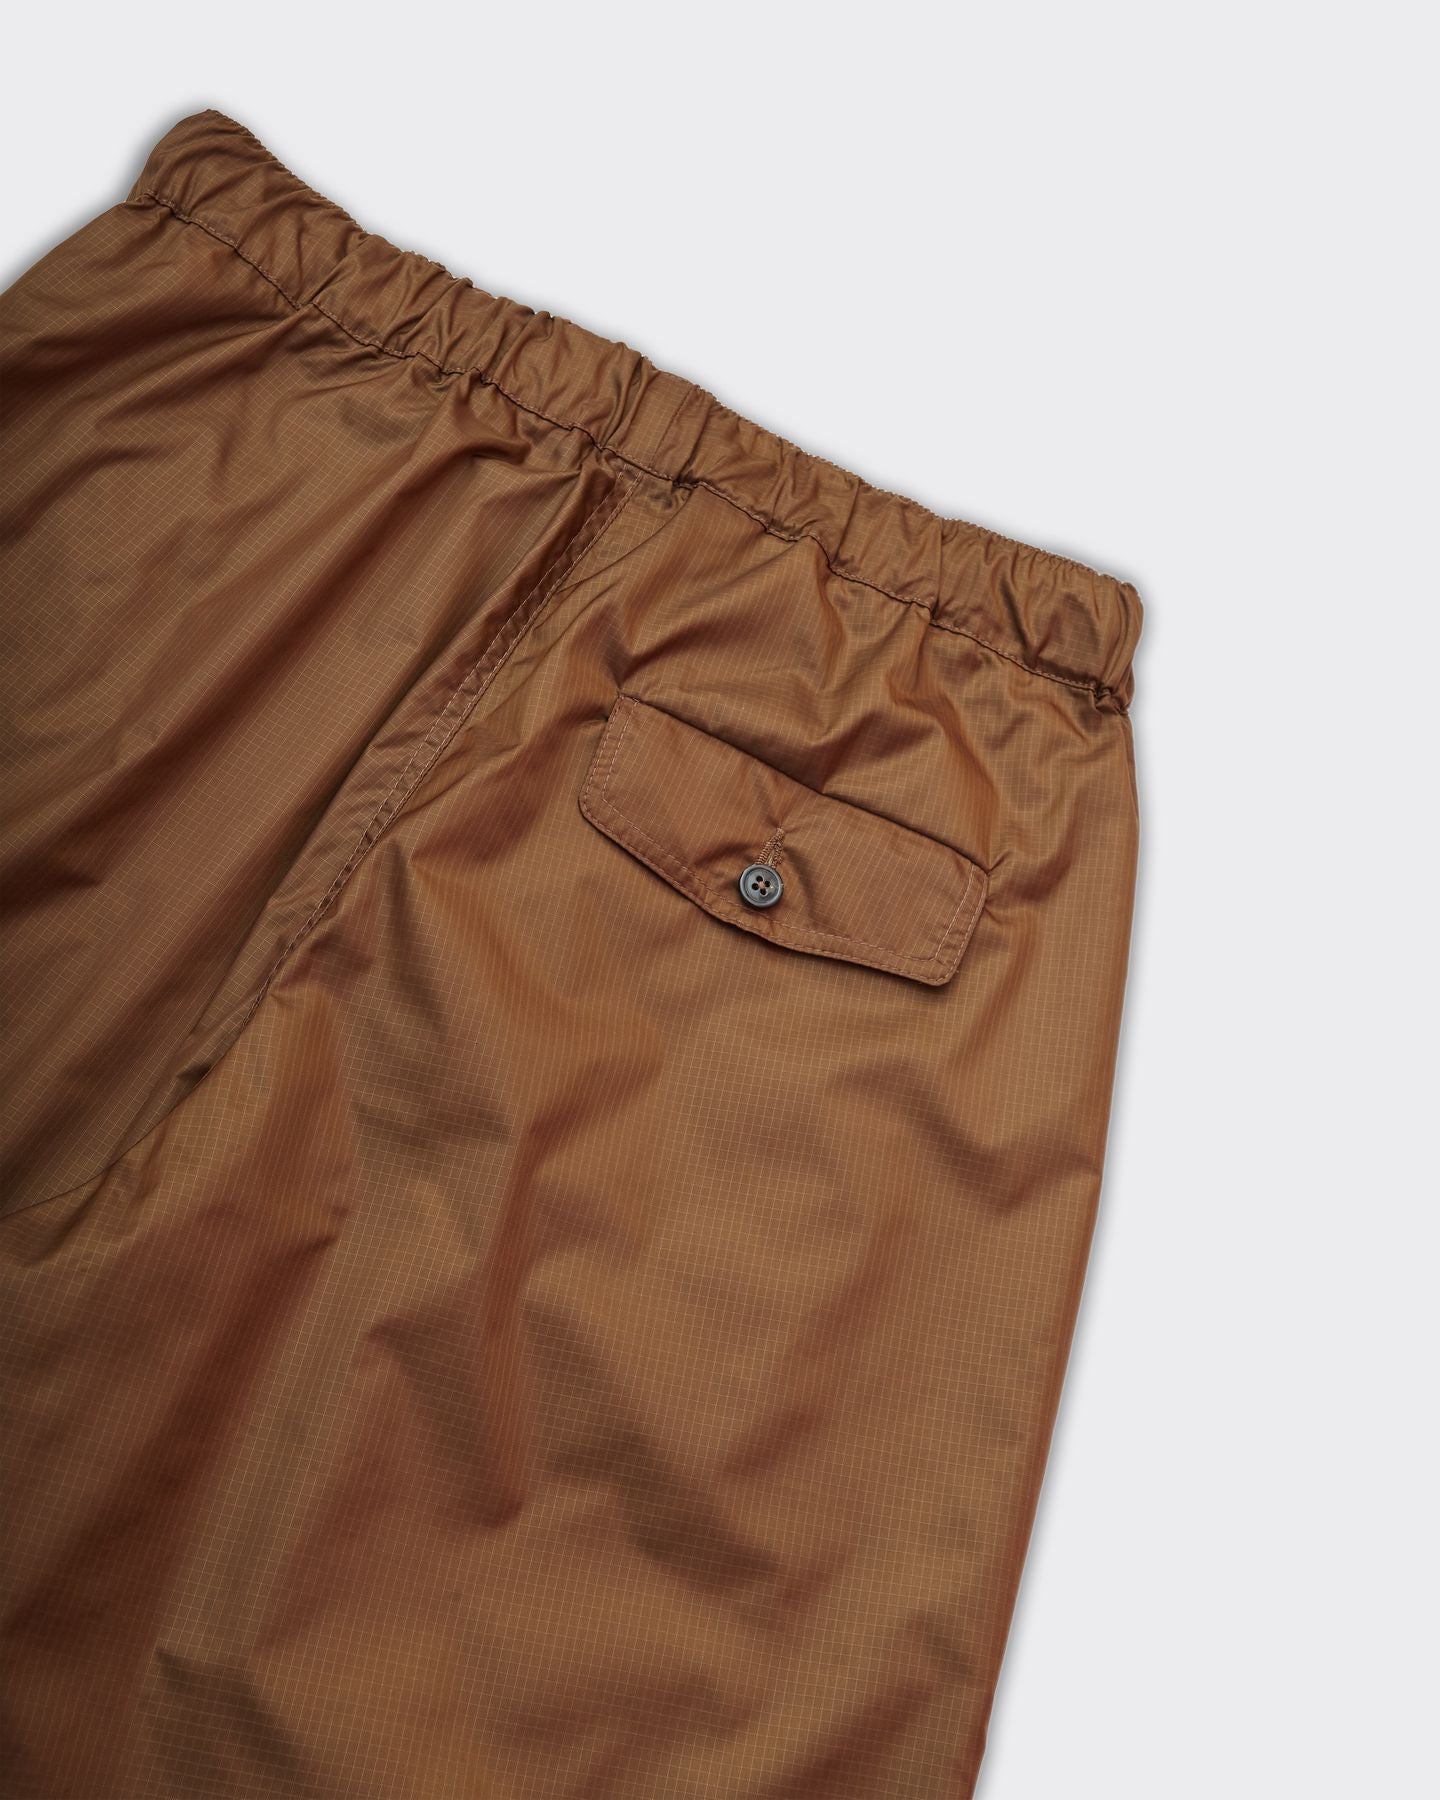 Relaxed Nylon Ripstop Trousers Brown